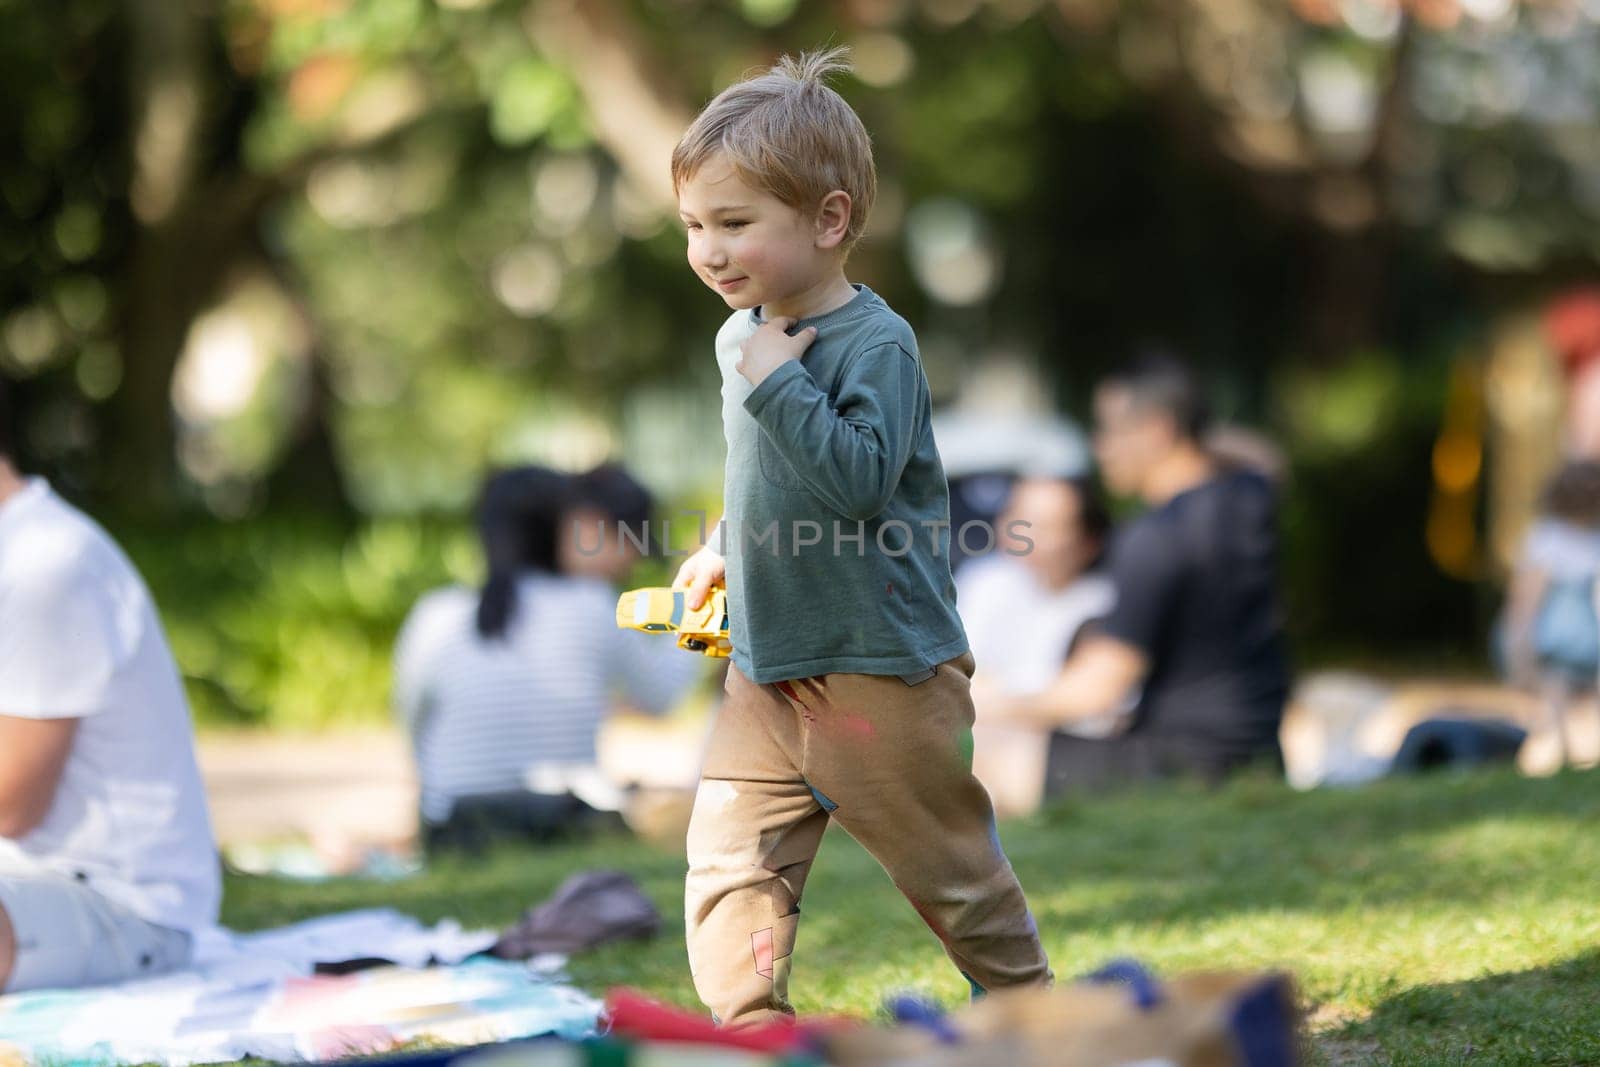 A young boy is playing with a toy car in a park. There are other people in the background, some of whom are sitting on blankets. The scene is lively and playful